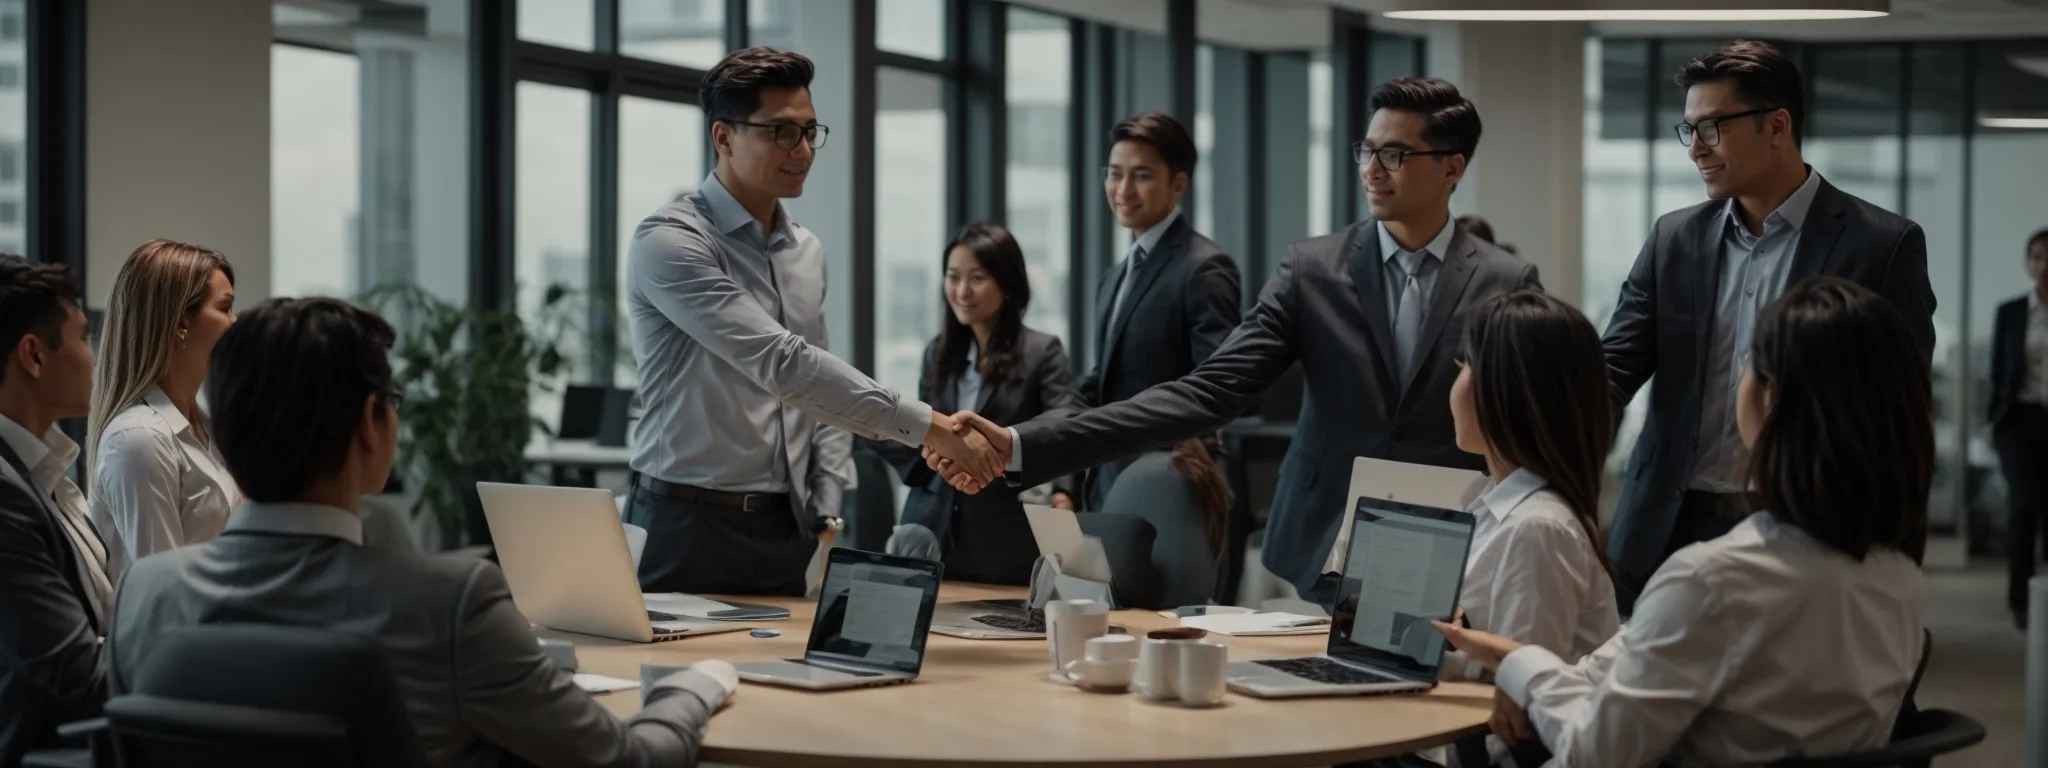 business professionals shaking hands in agreement in a modern office setting, with a laptop and notepads on the table, embodying the start of a collaborative partnership after a successful seo pitch.